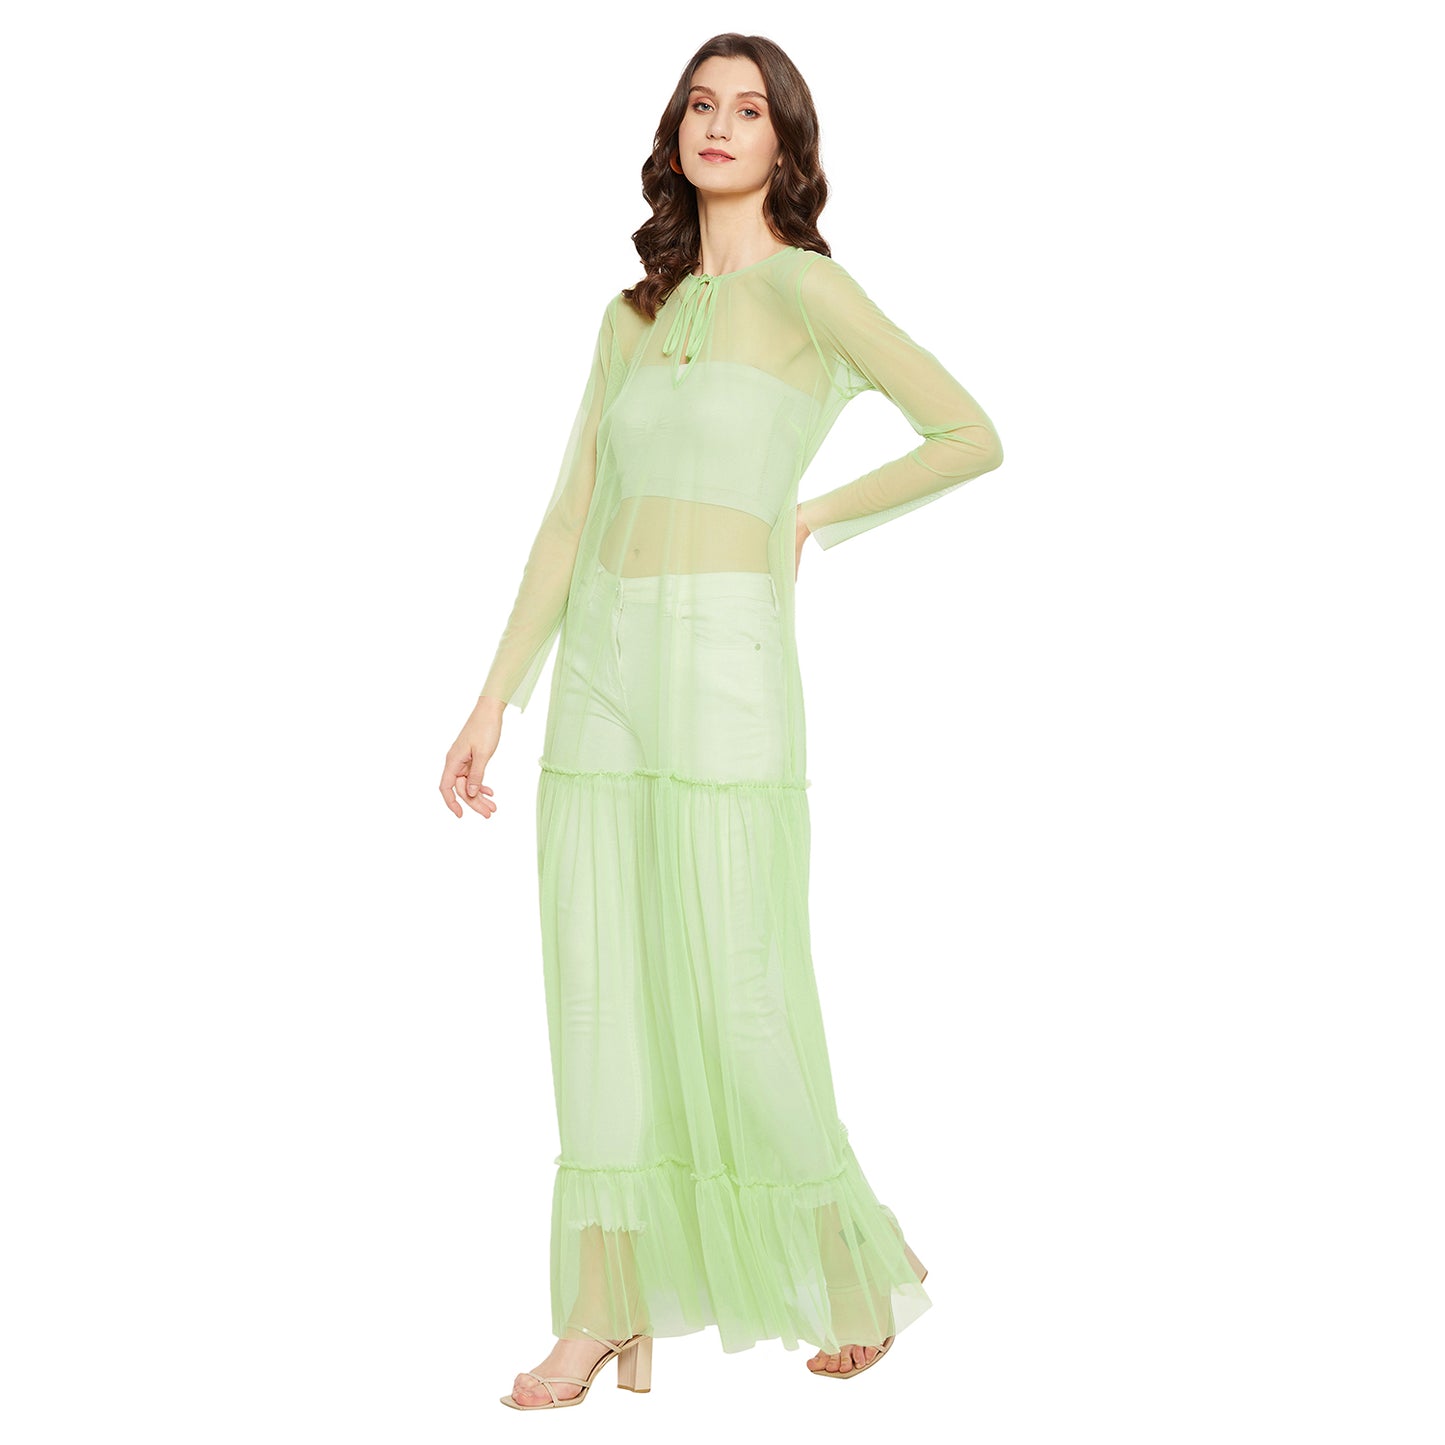 LY2 Parrot Green Tulle Dress